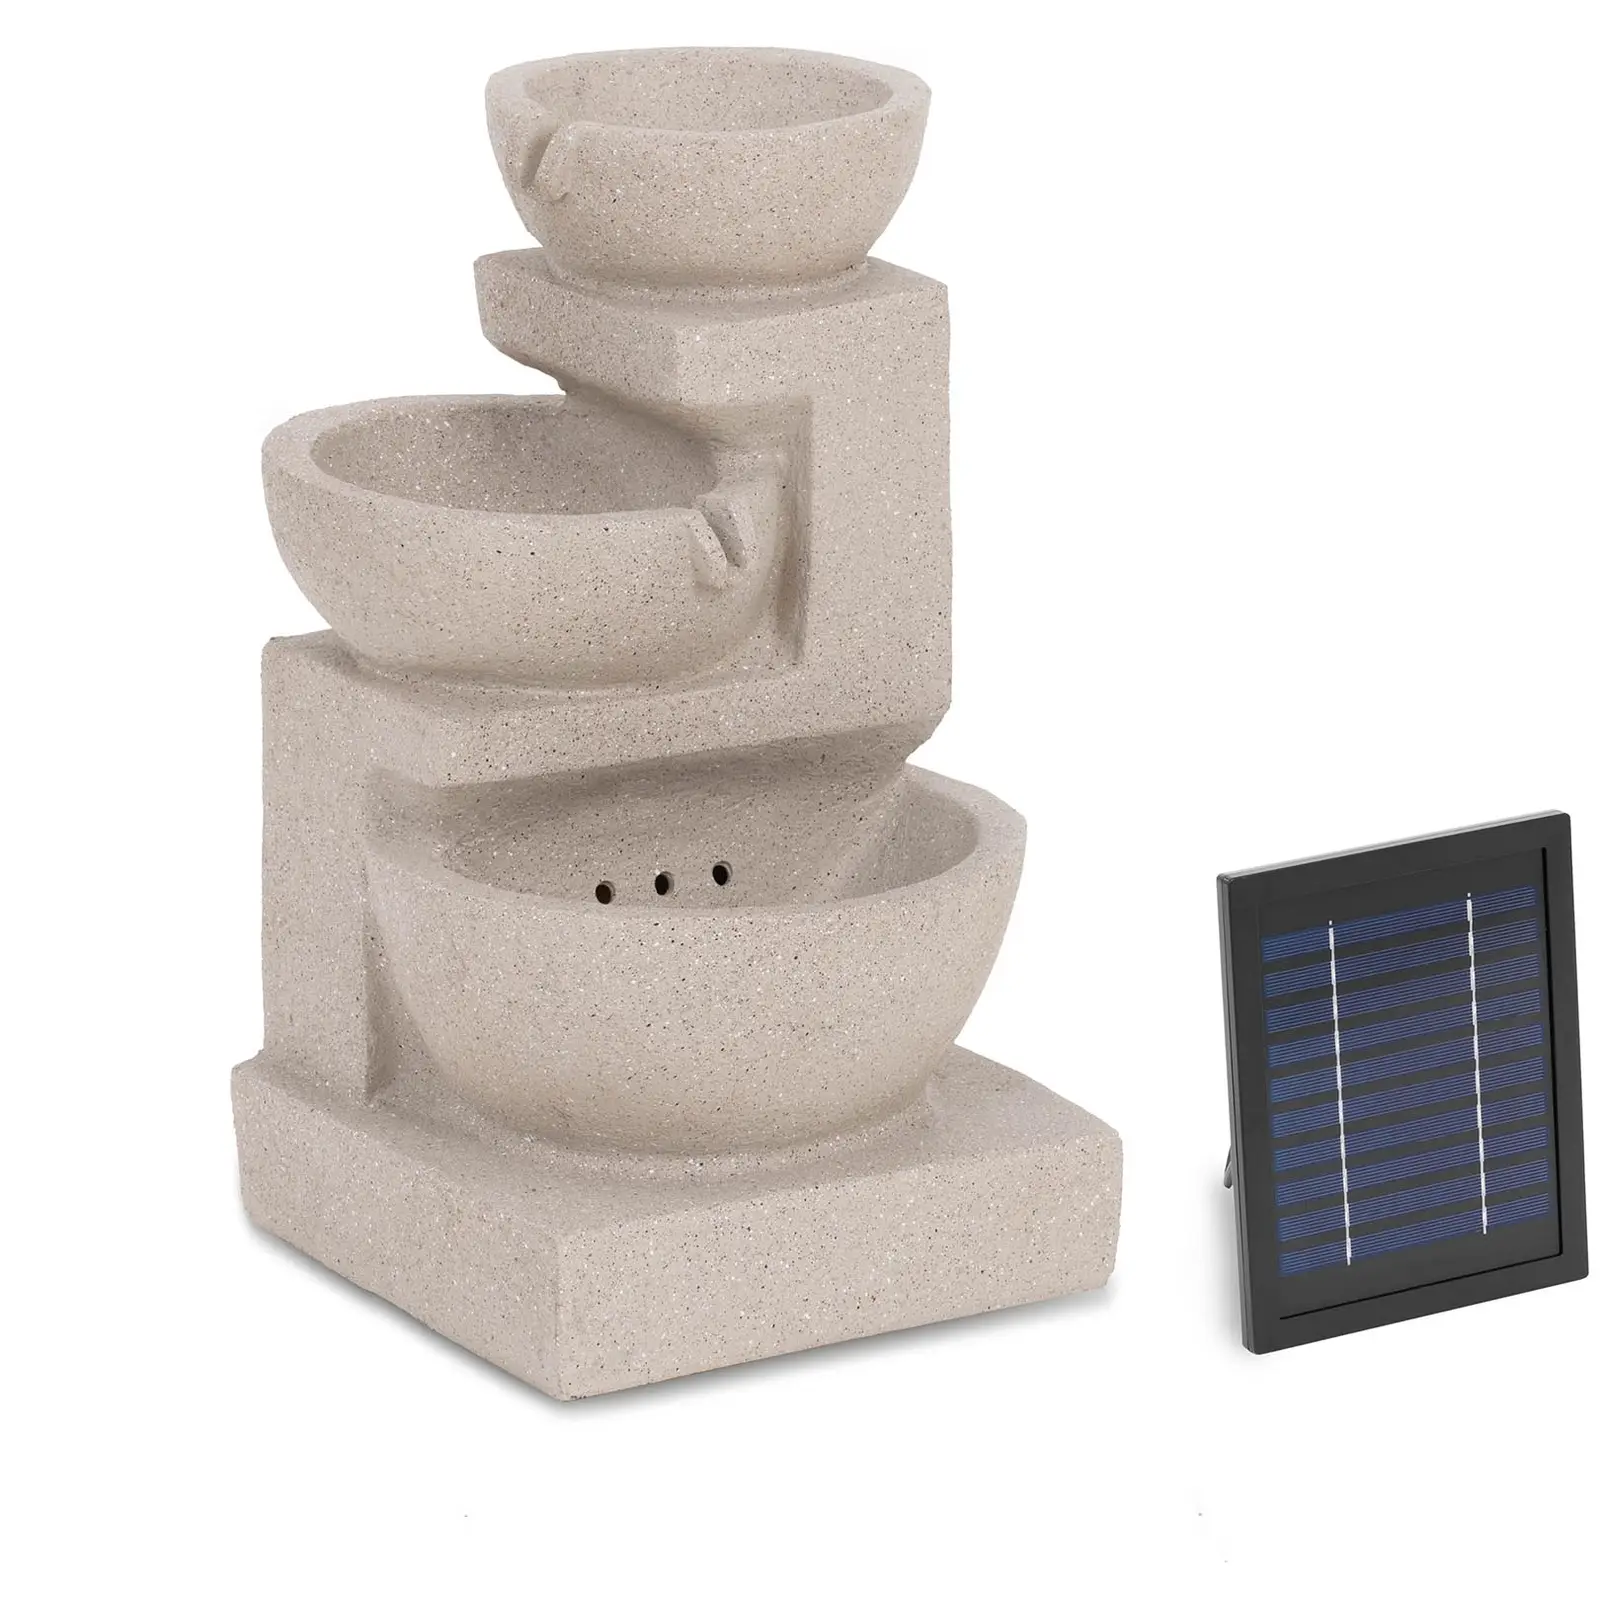 Solar Water Fountain - 3 bowls on clay wall - LED lighting